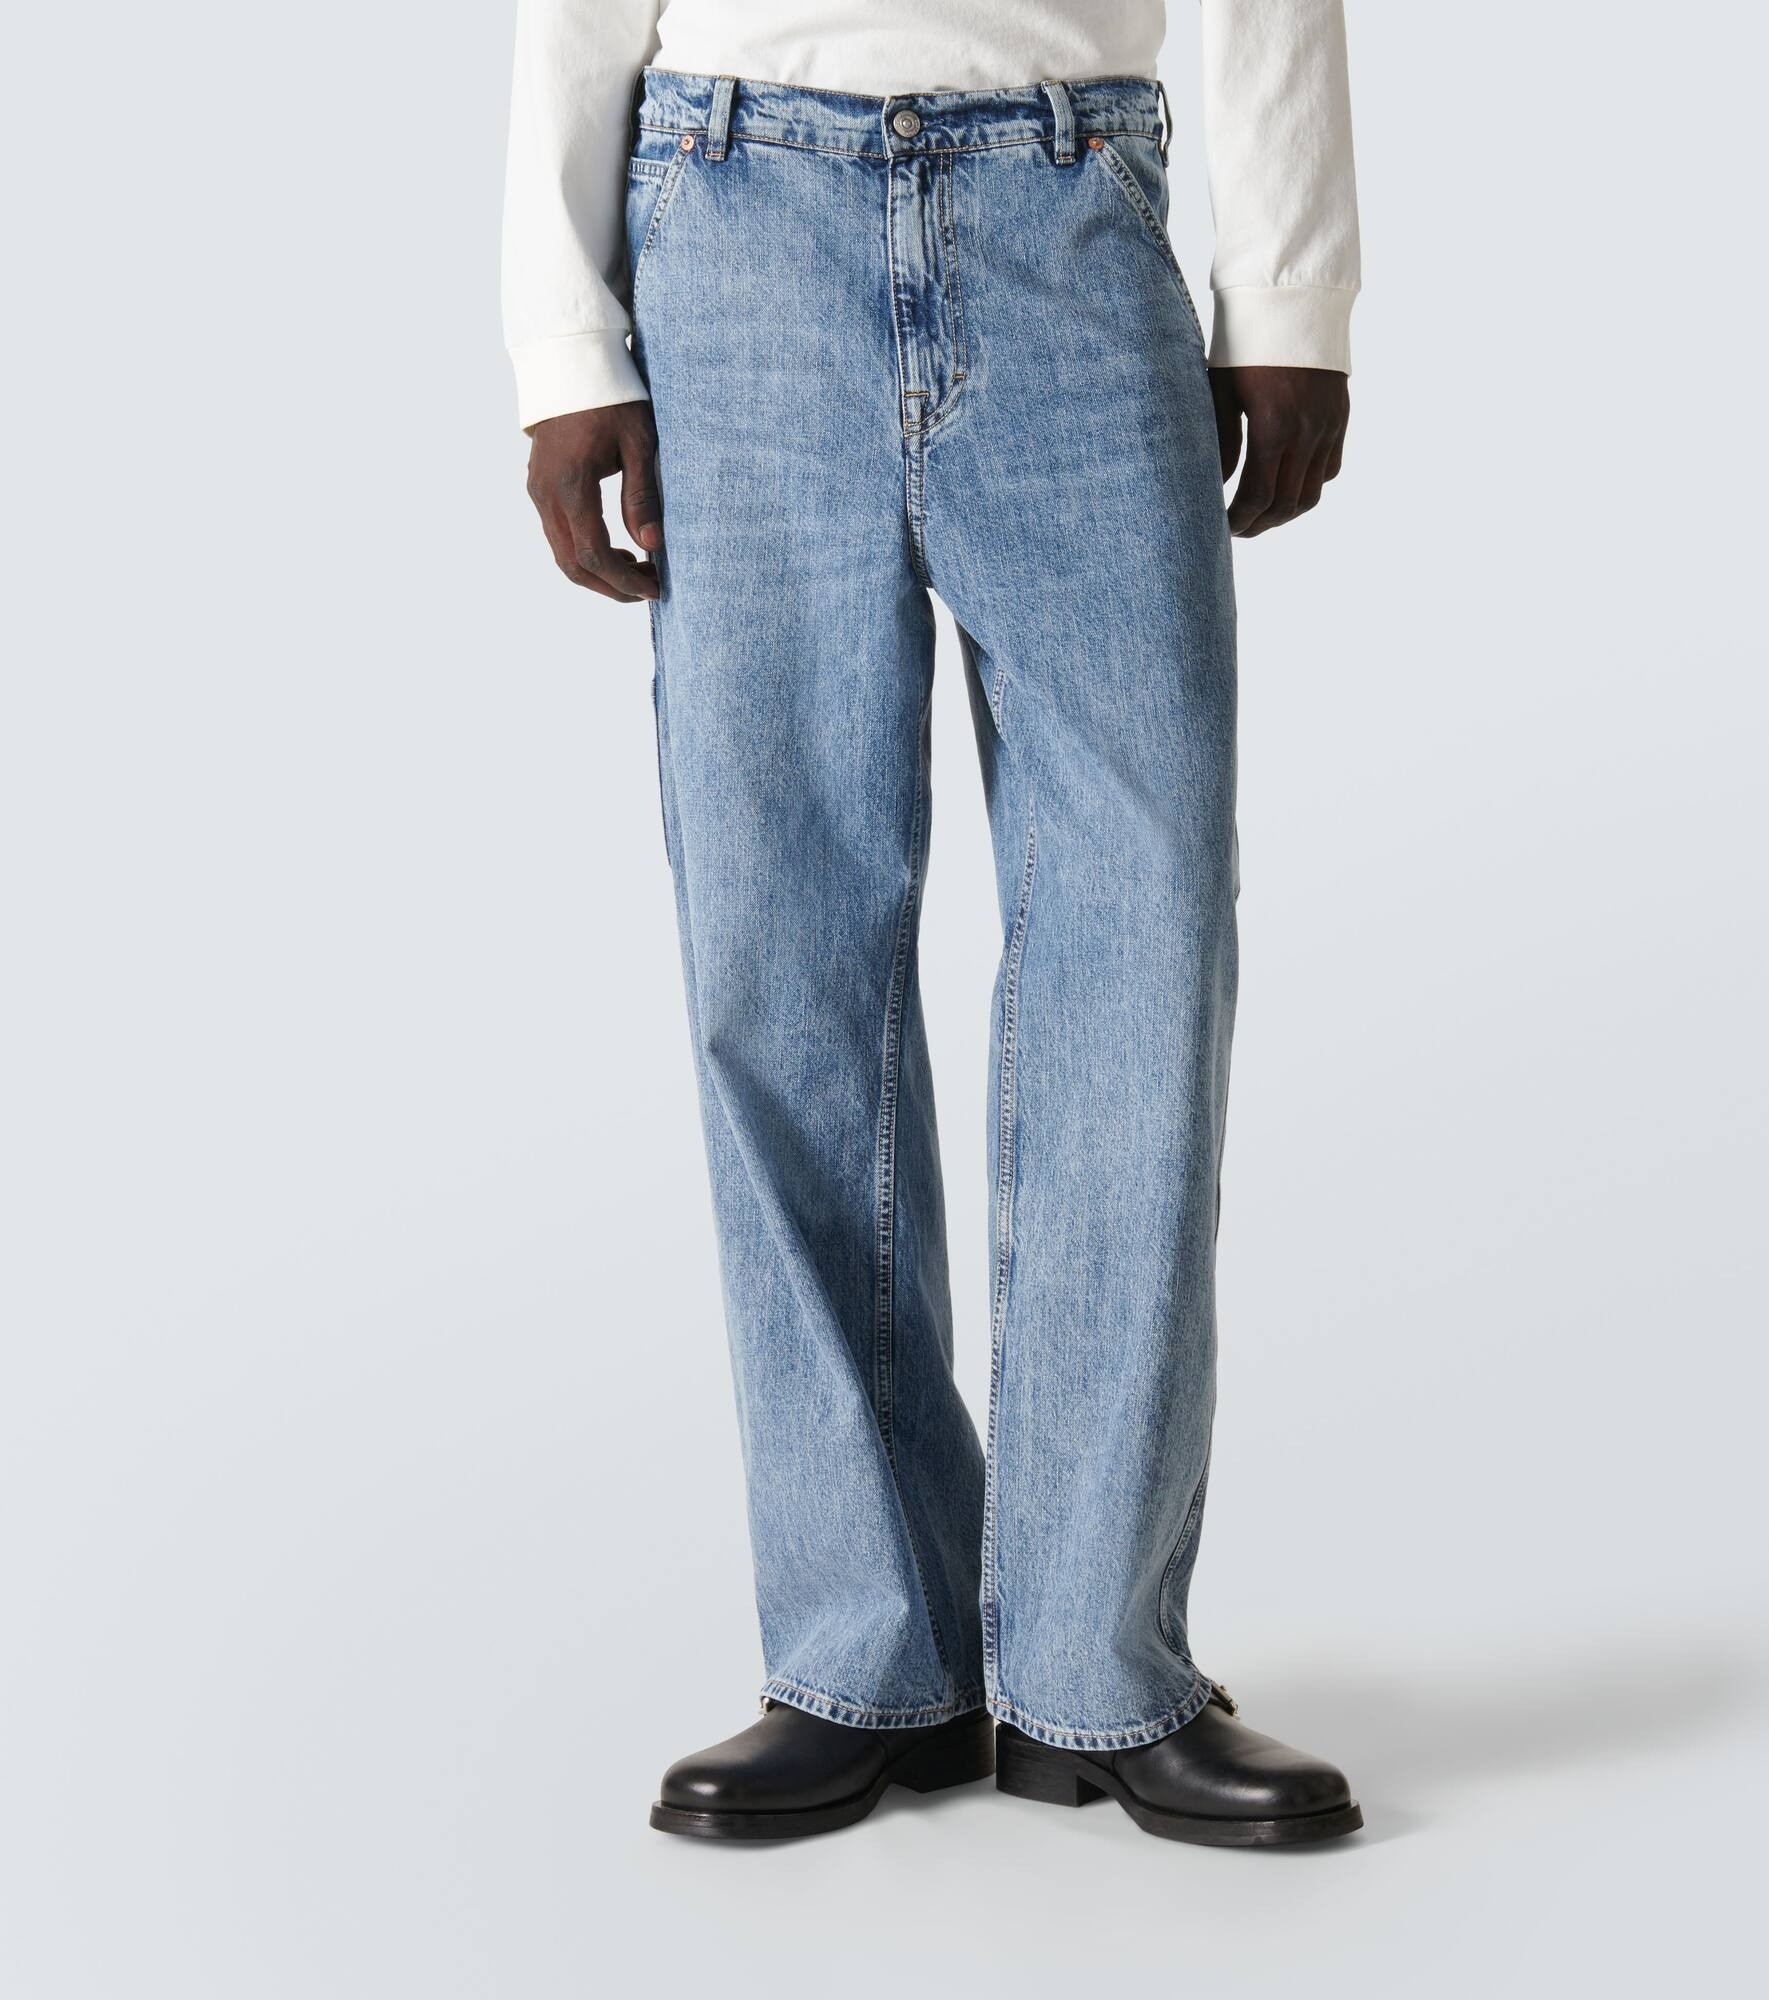 Joiner straight jeans - 3